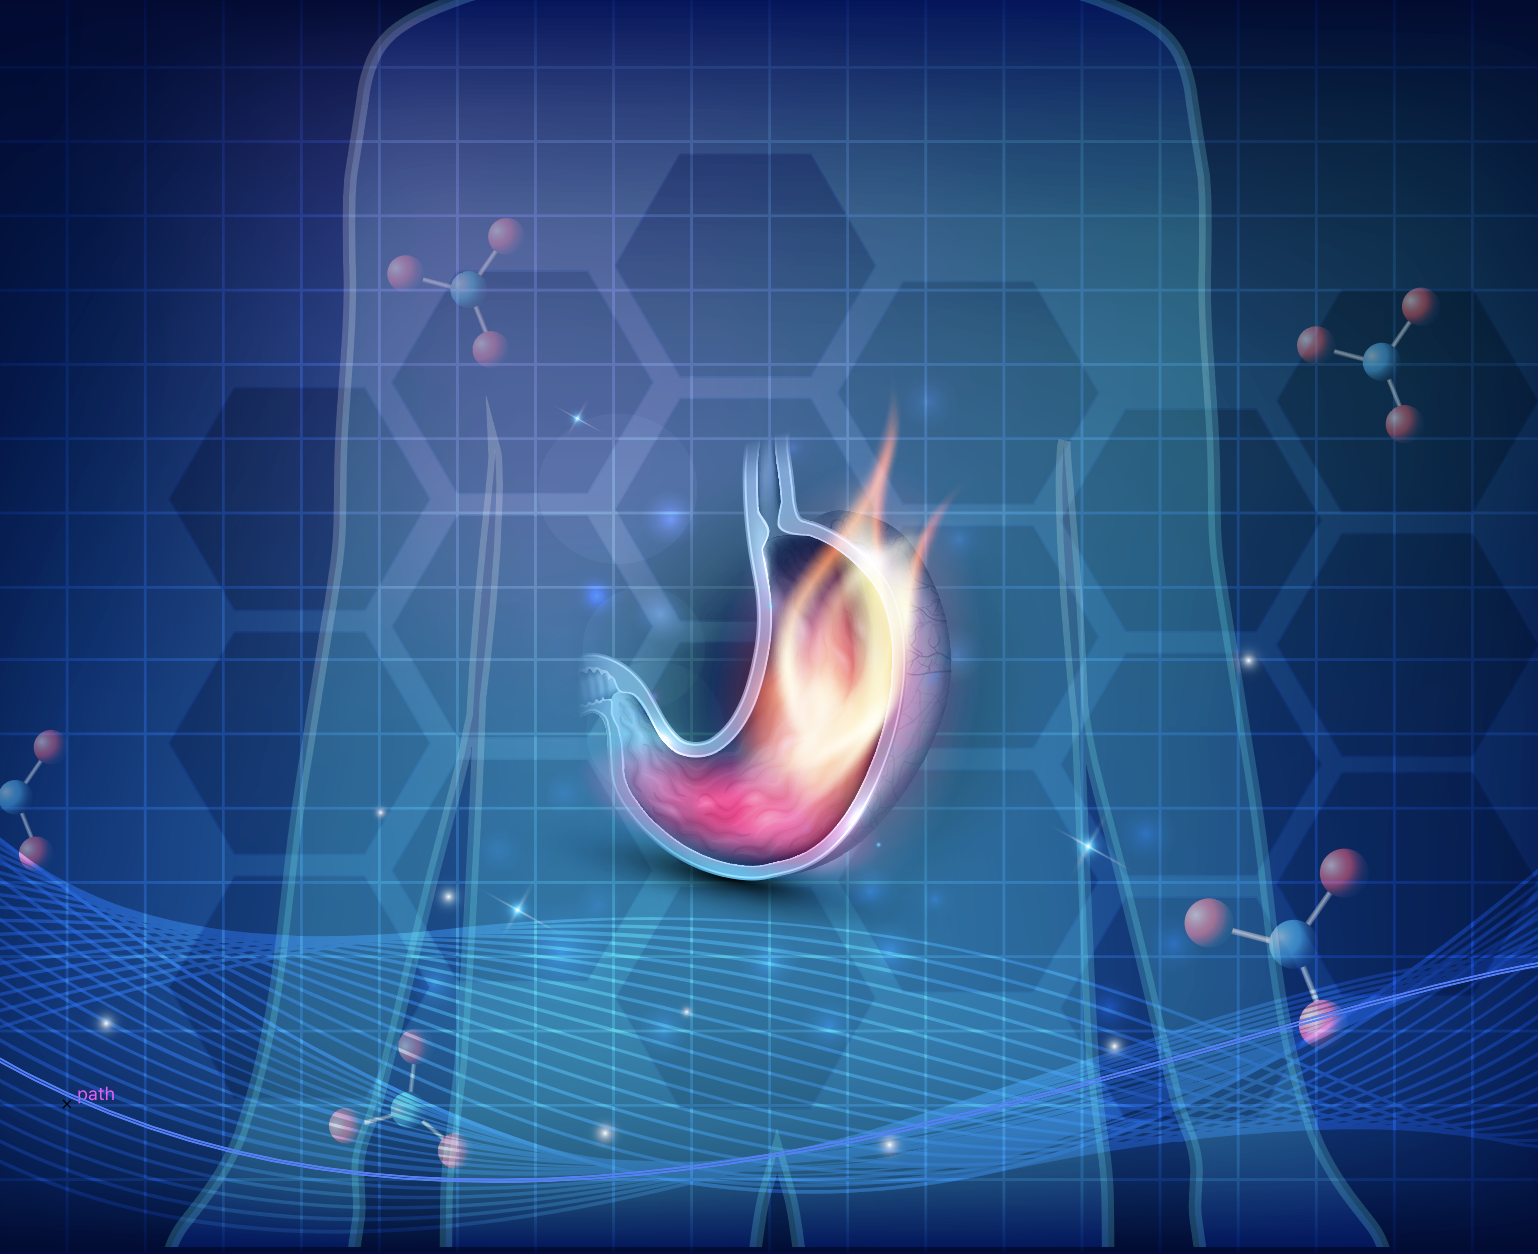 GERD Concept stomach on fire blue background 1538 x 1254